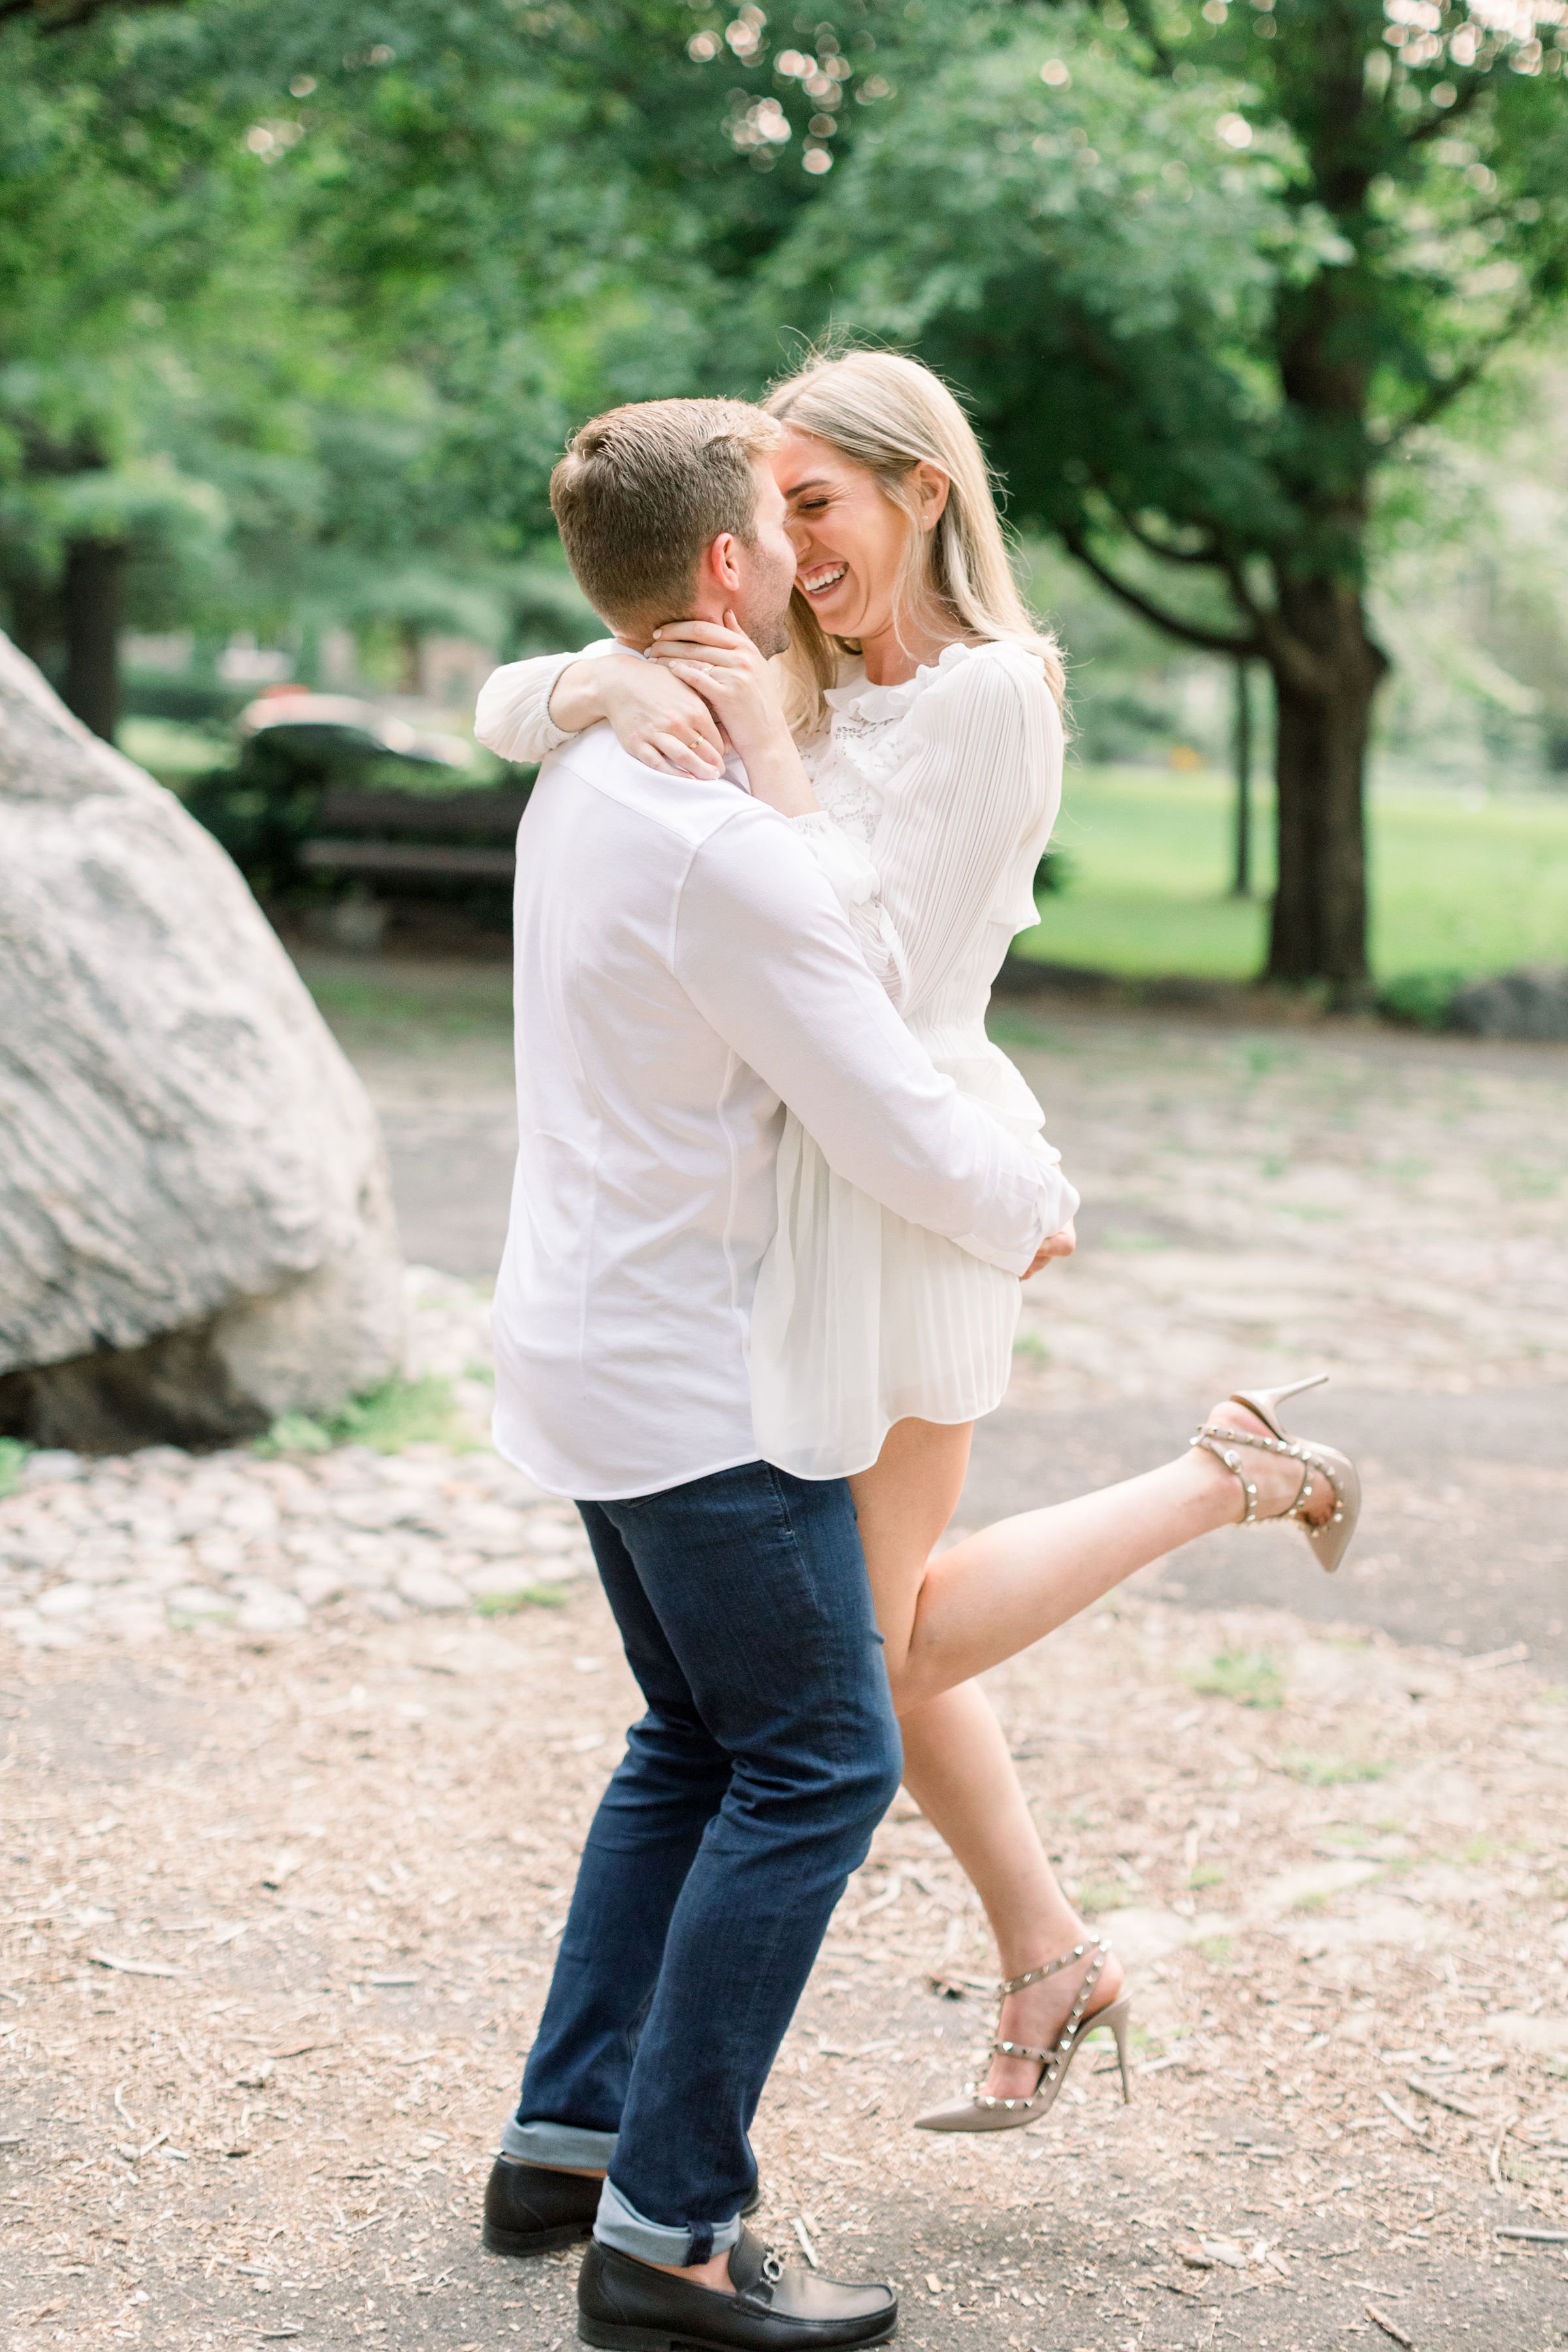  Engagement photographer Chelsea Mason Photography captures a woman with her leg popped while going in for a kiss. popped leg kisses #Ottawaengagements #Ottawaweddingphotographers #engagementwithdogs #ChelseaMasonPhotography #ChelseaMasonEngagements 